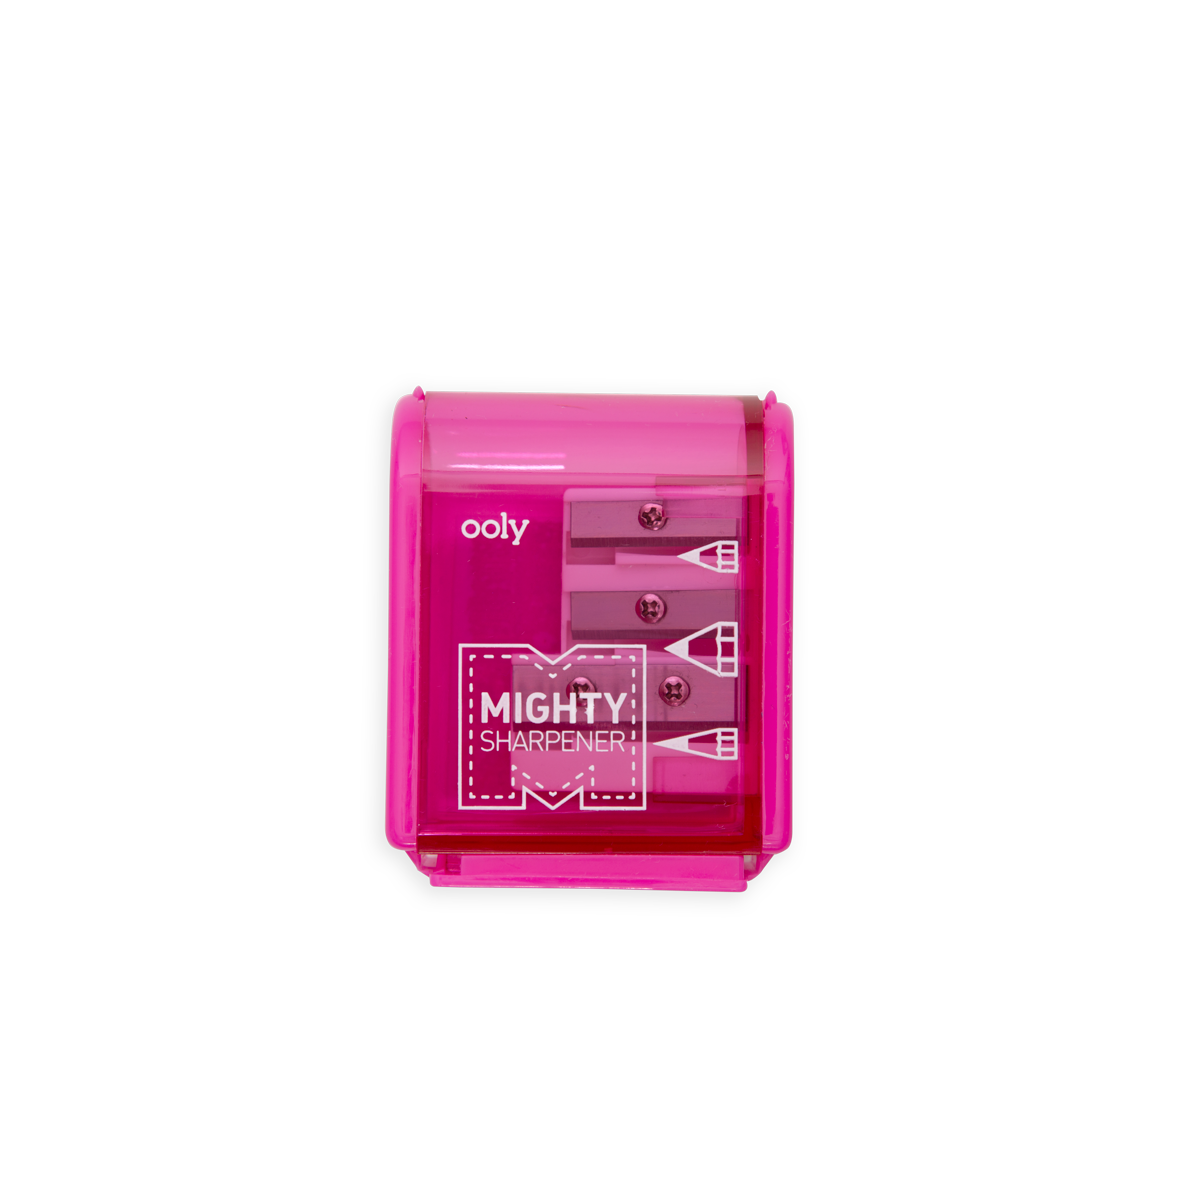 OOLY Mighty Sharpener in pink